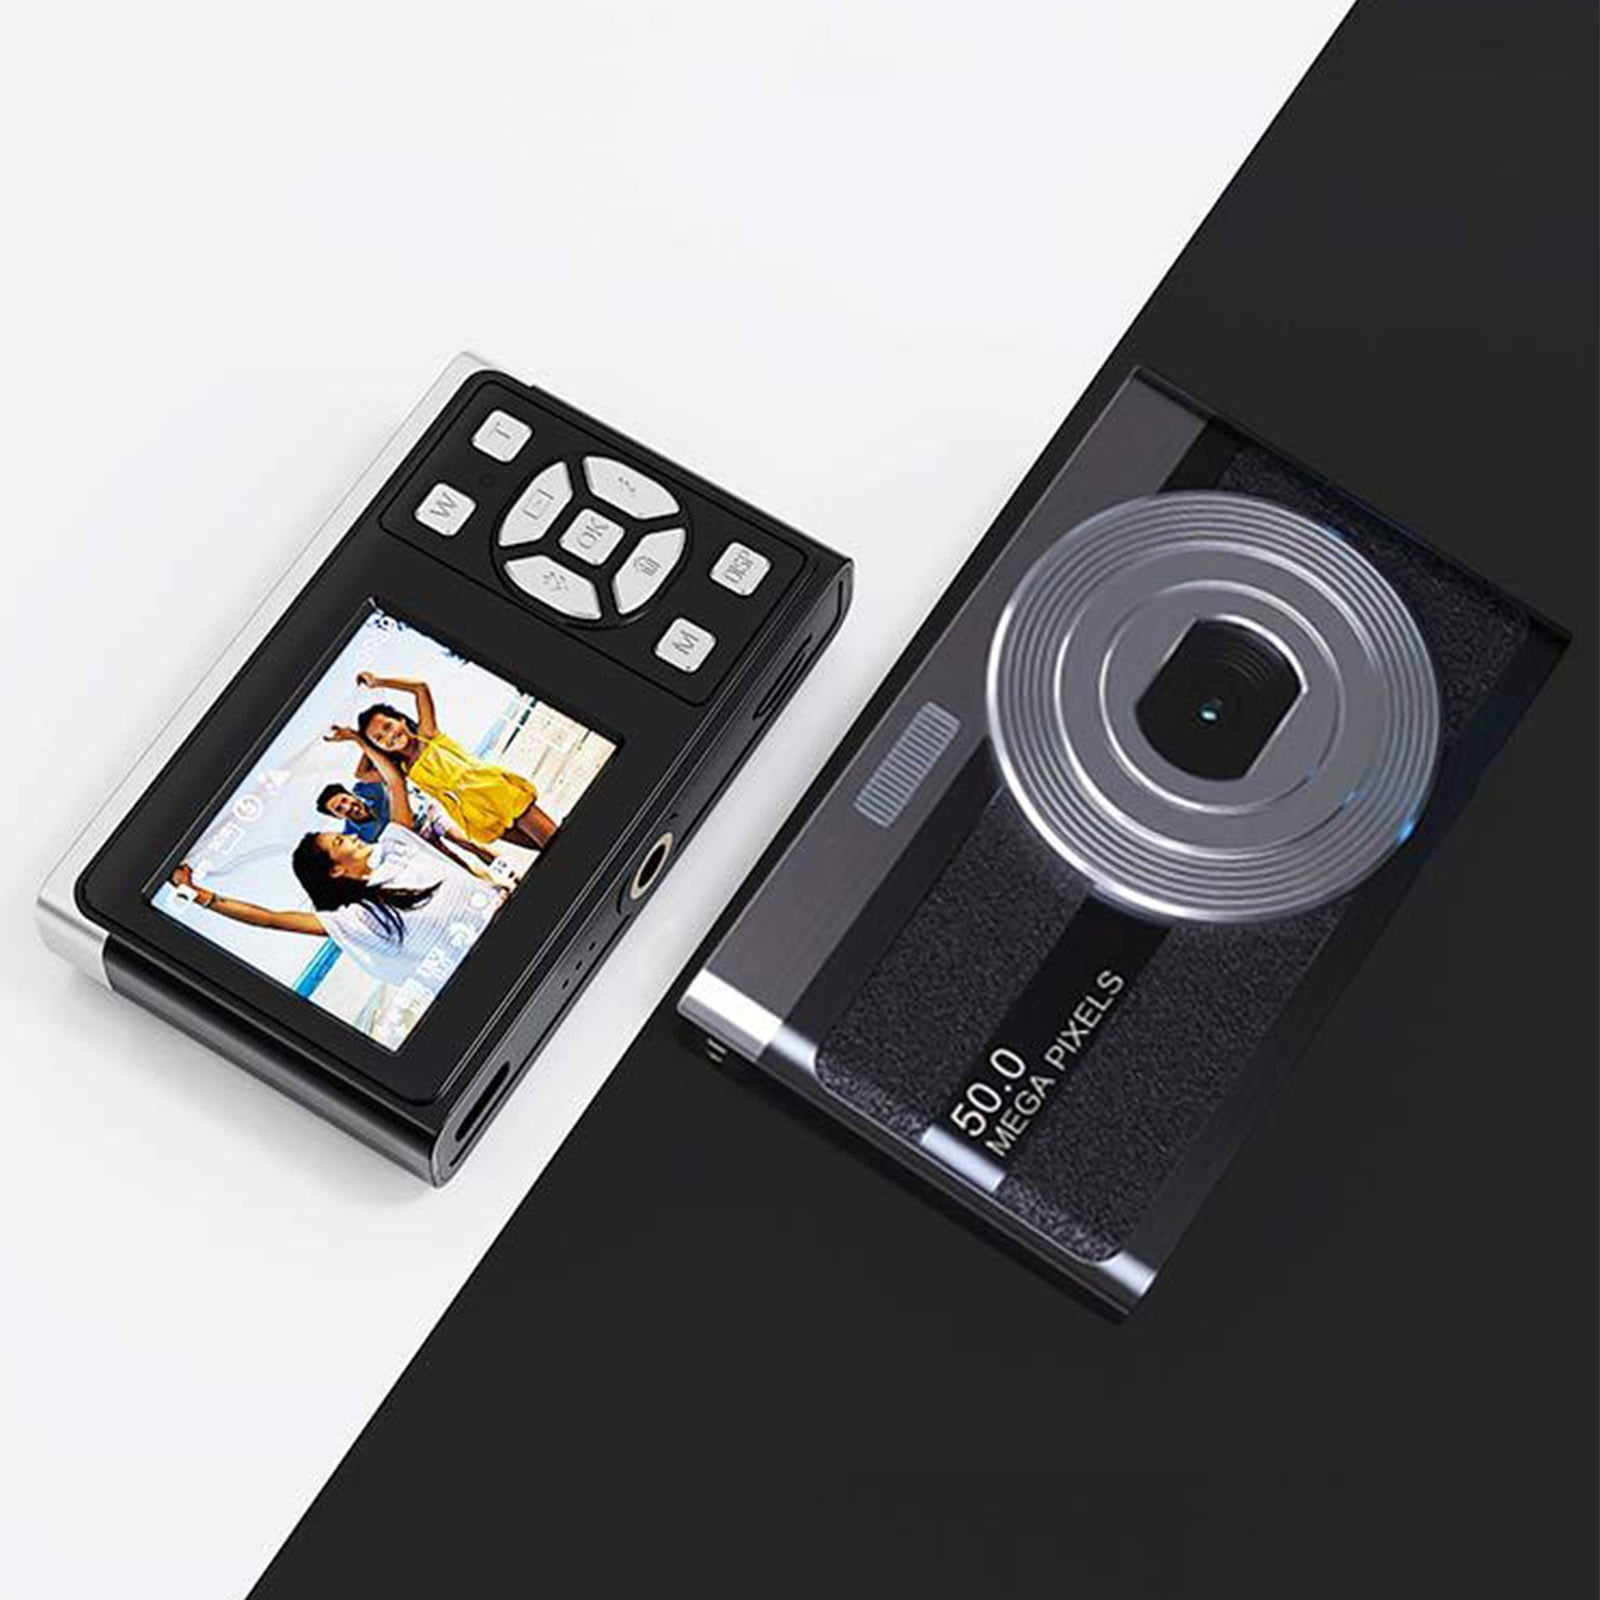 Dpityserensio 4K High Definition Digital Macro Camera 2.2 Inches,50  Million-pixels,16x Digital Zoom,Entry-level CCD Affordable Portable Card  Machine